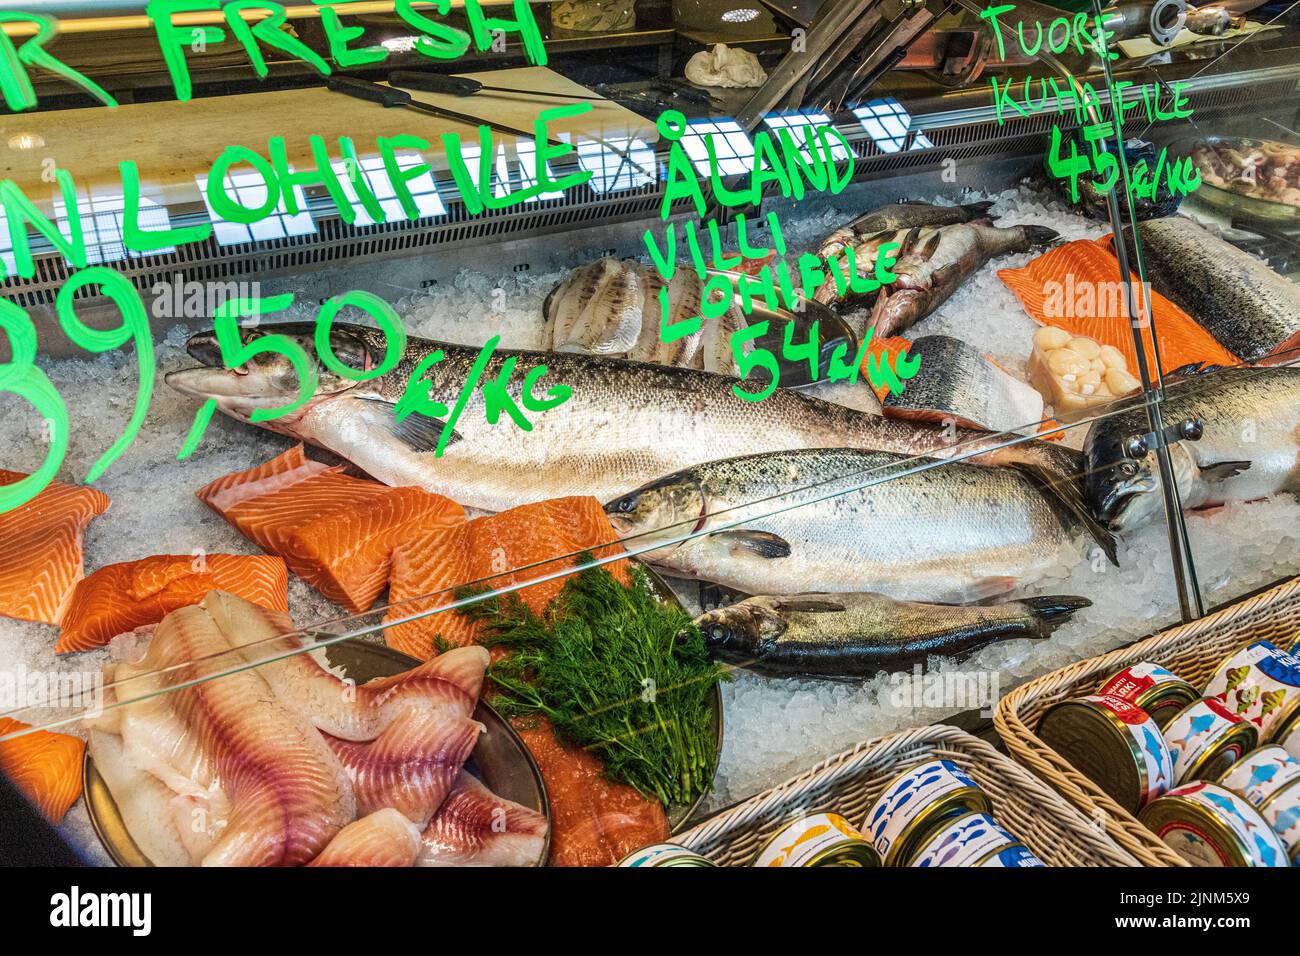 Salmon and seafood on sale in the Old Market Hall (Vanha Kauppahalli) in the Market Square in Helsinki, Finland Stock Photo